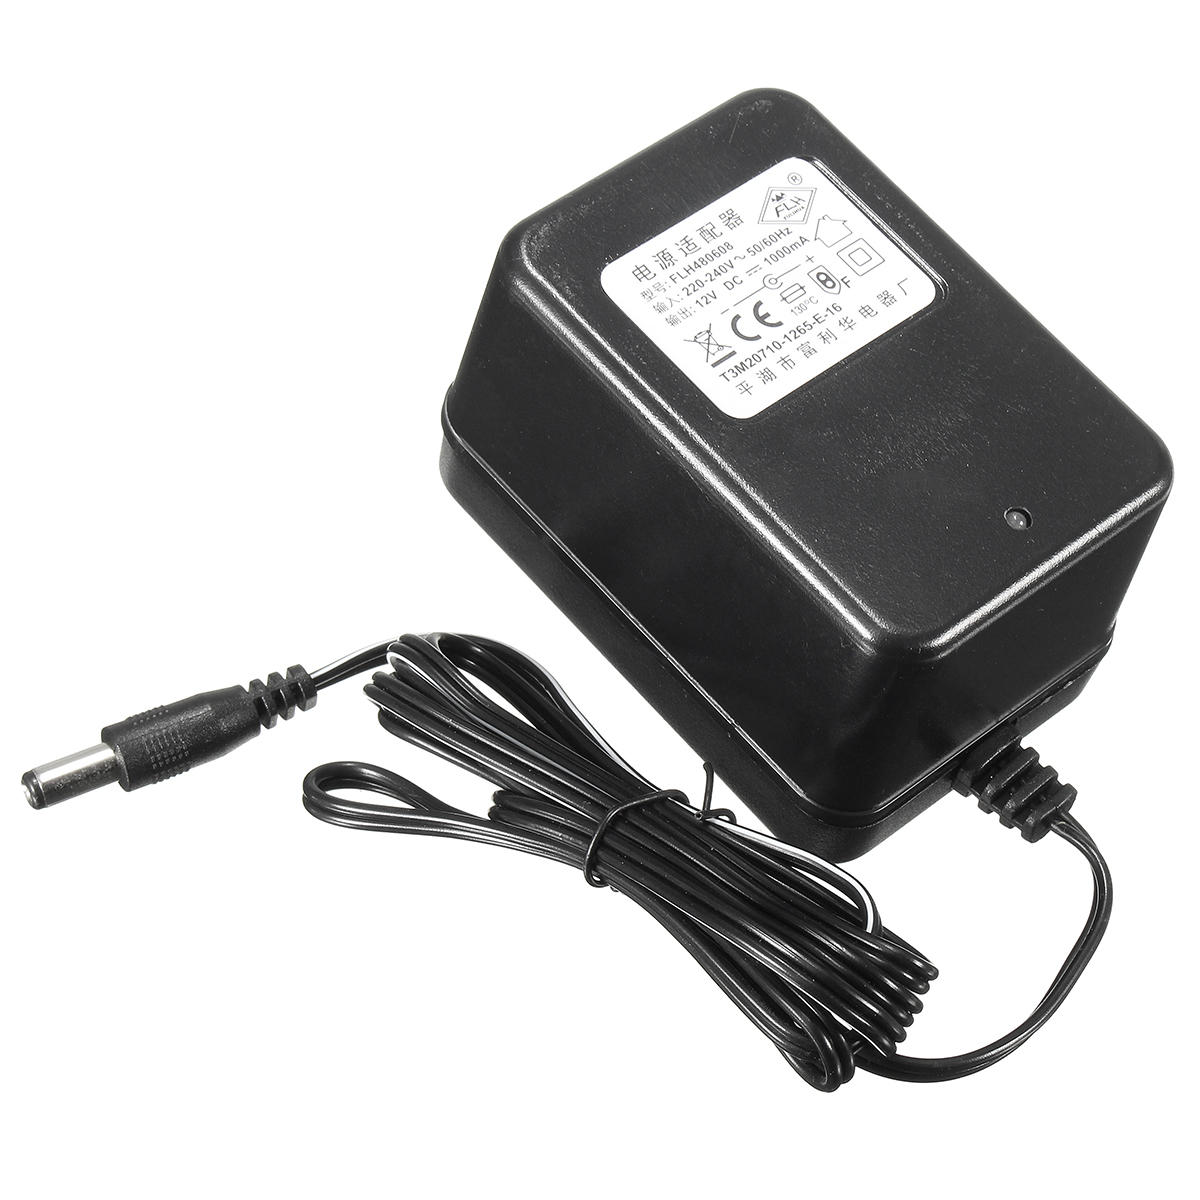 12V 1A Battery Charger Adapter Power Supply